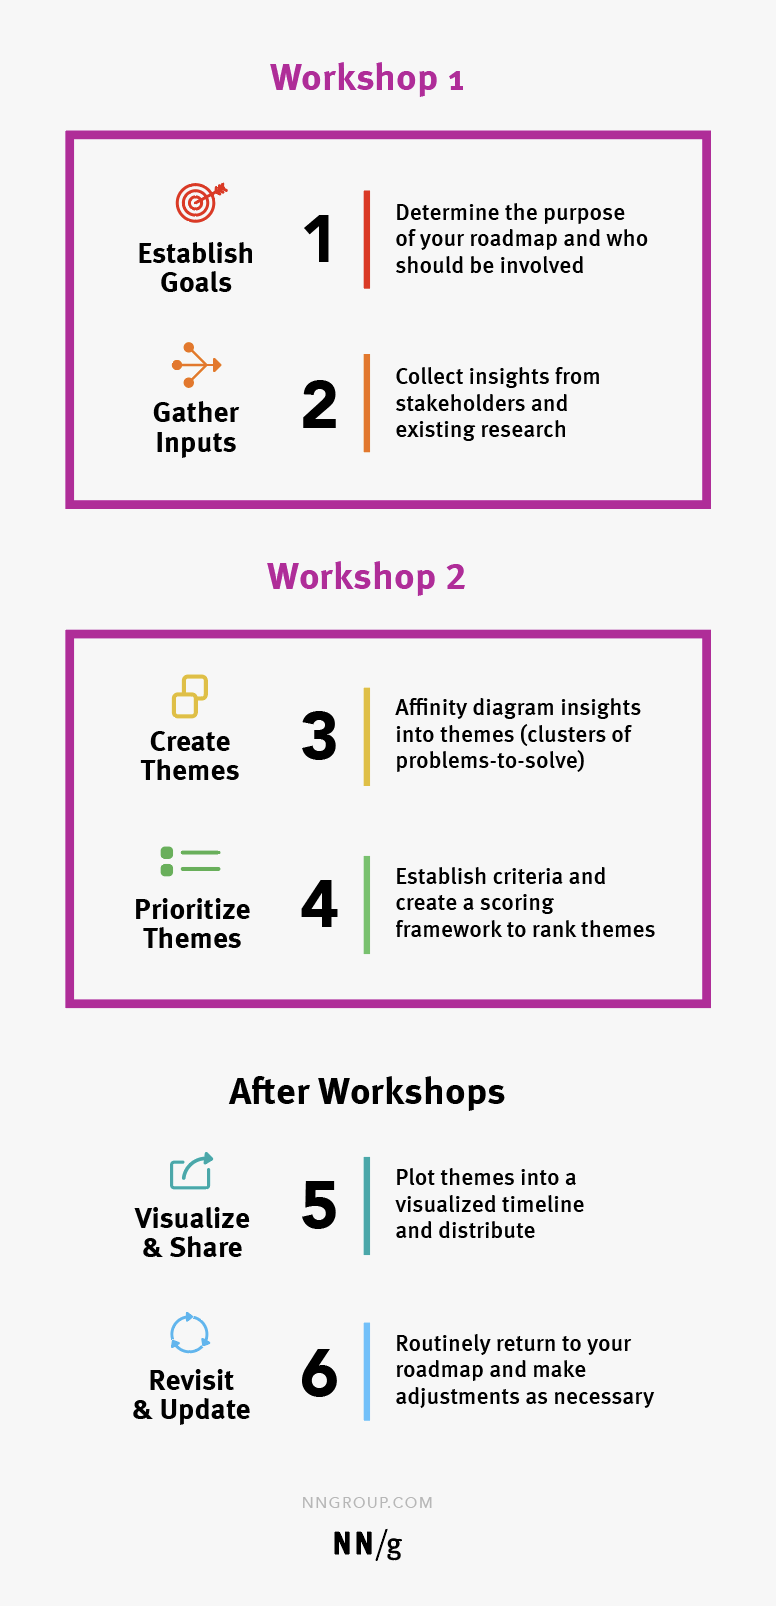 Two roadmapping workshops can be held, one workshop to gather inputs, the next to create and prioritize themes.